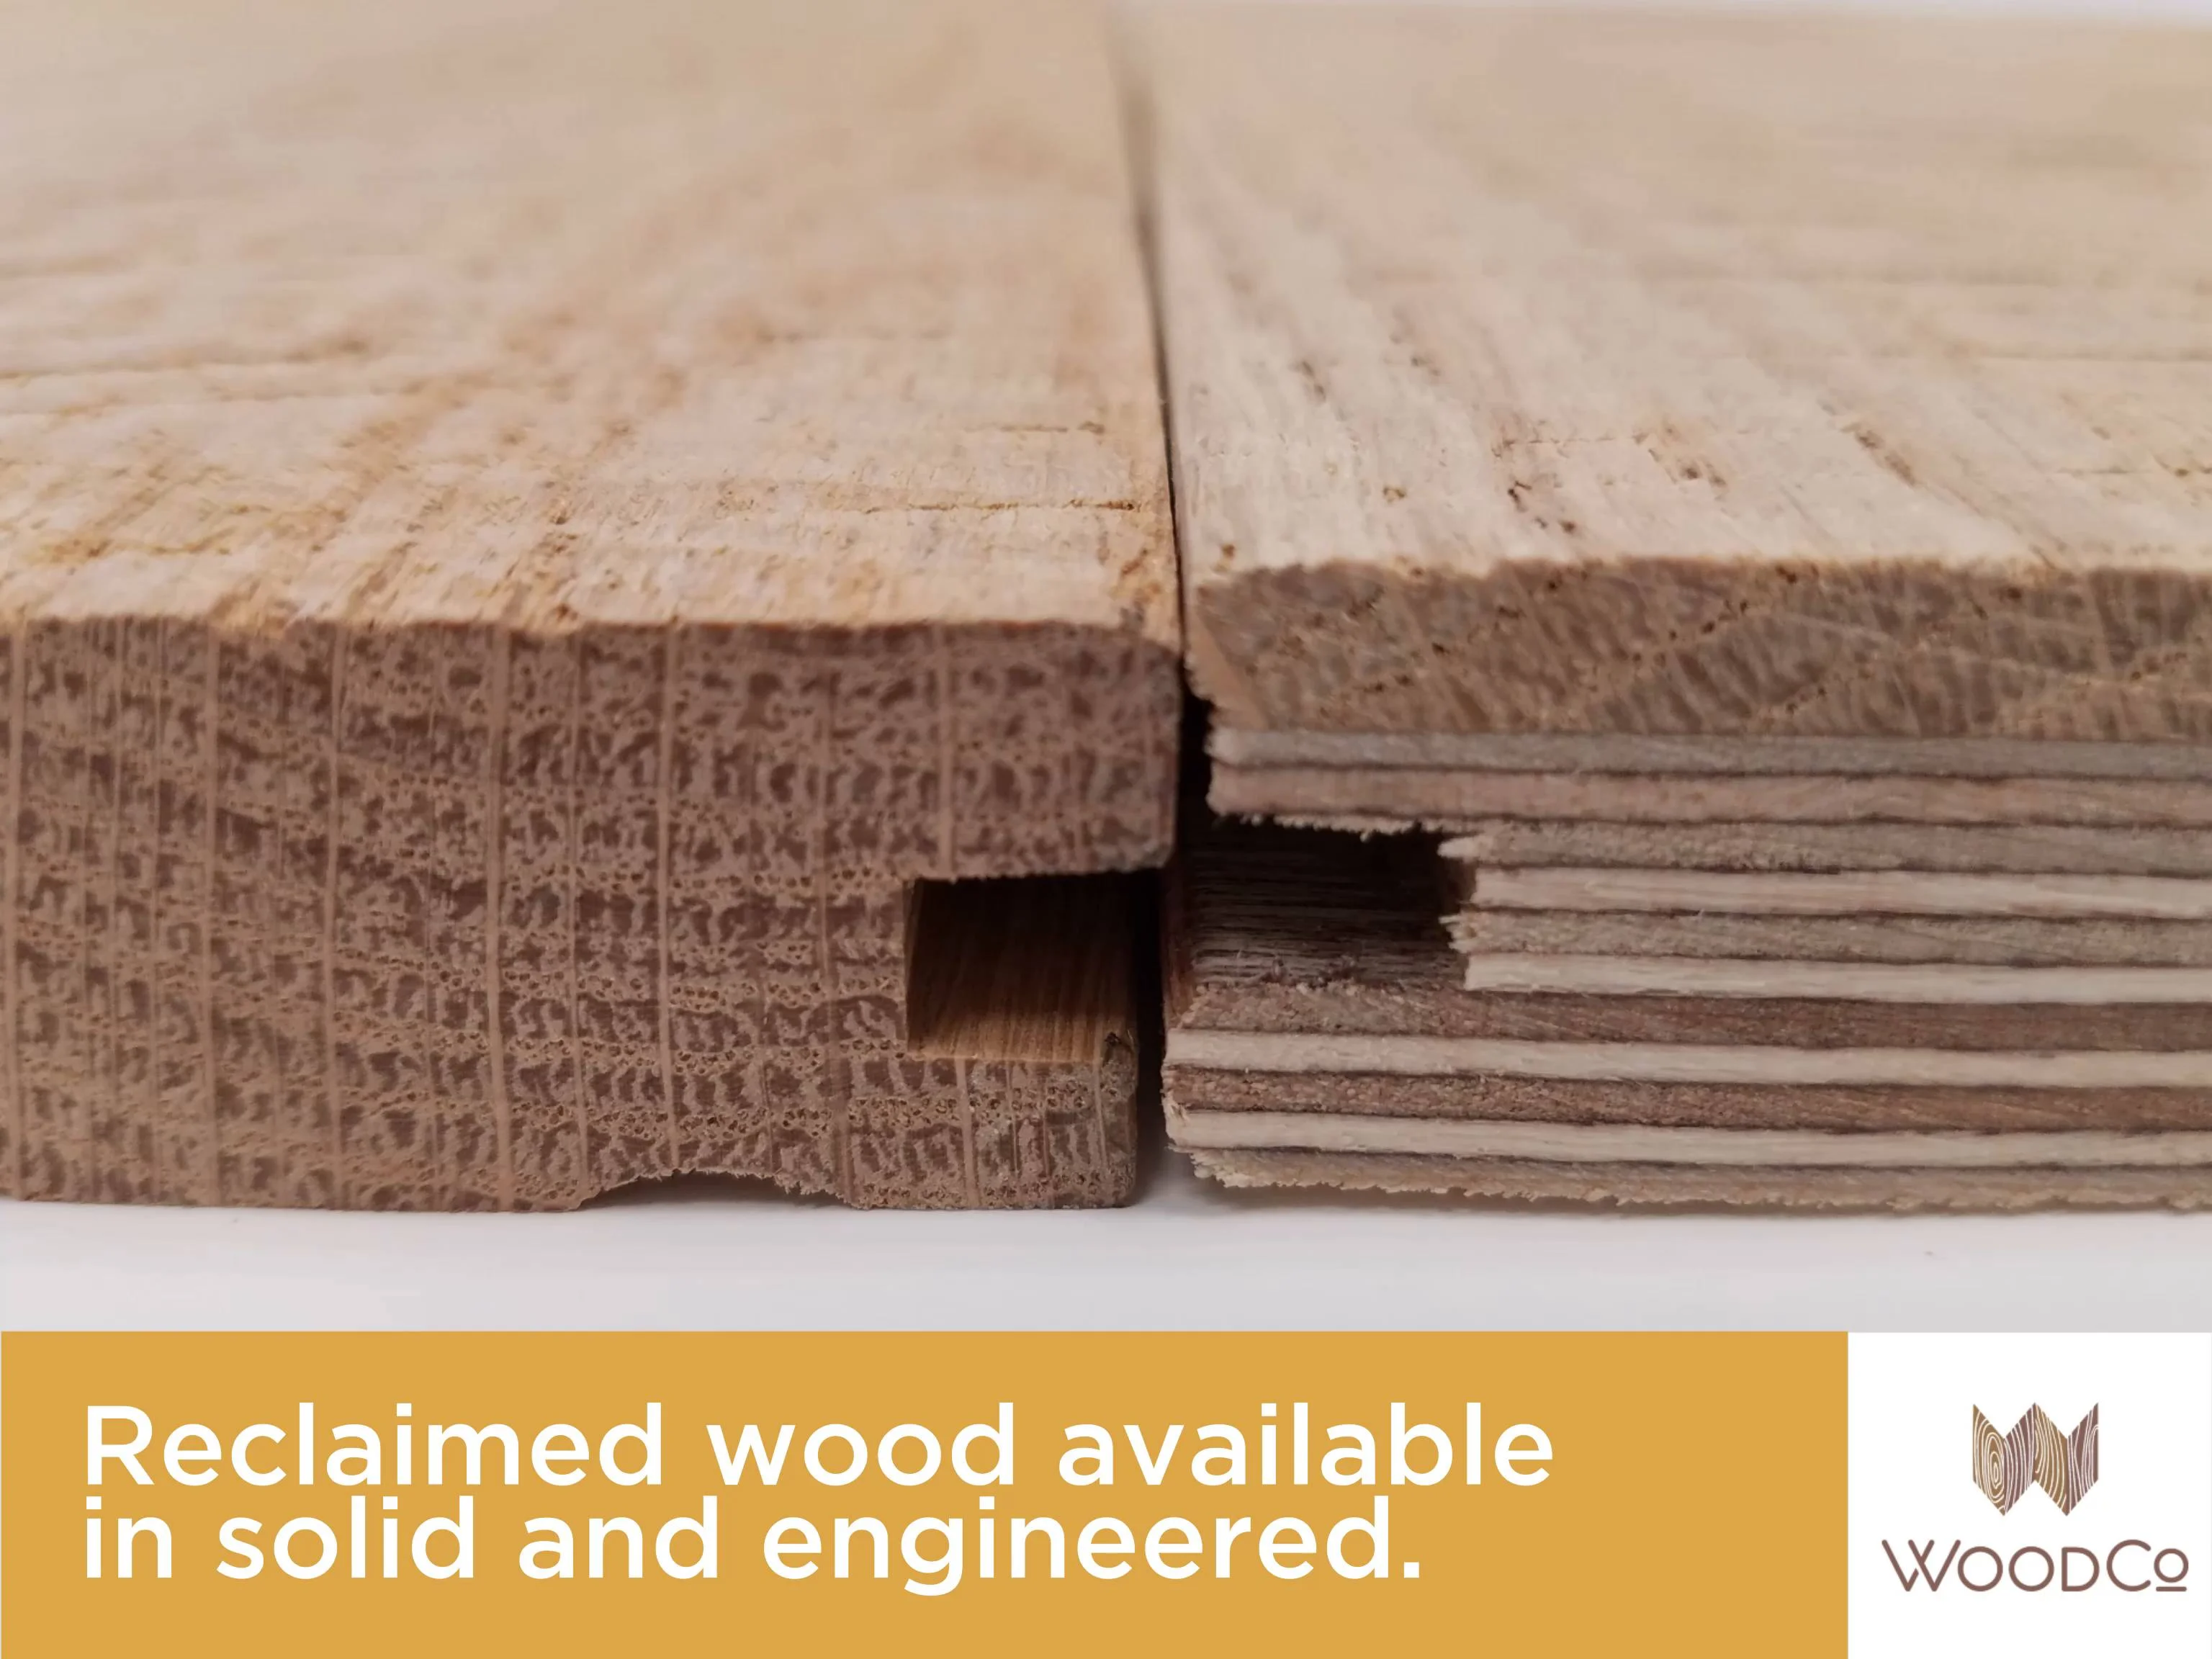 Benefits of Reclaimed Wood for Flooring & Decking